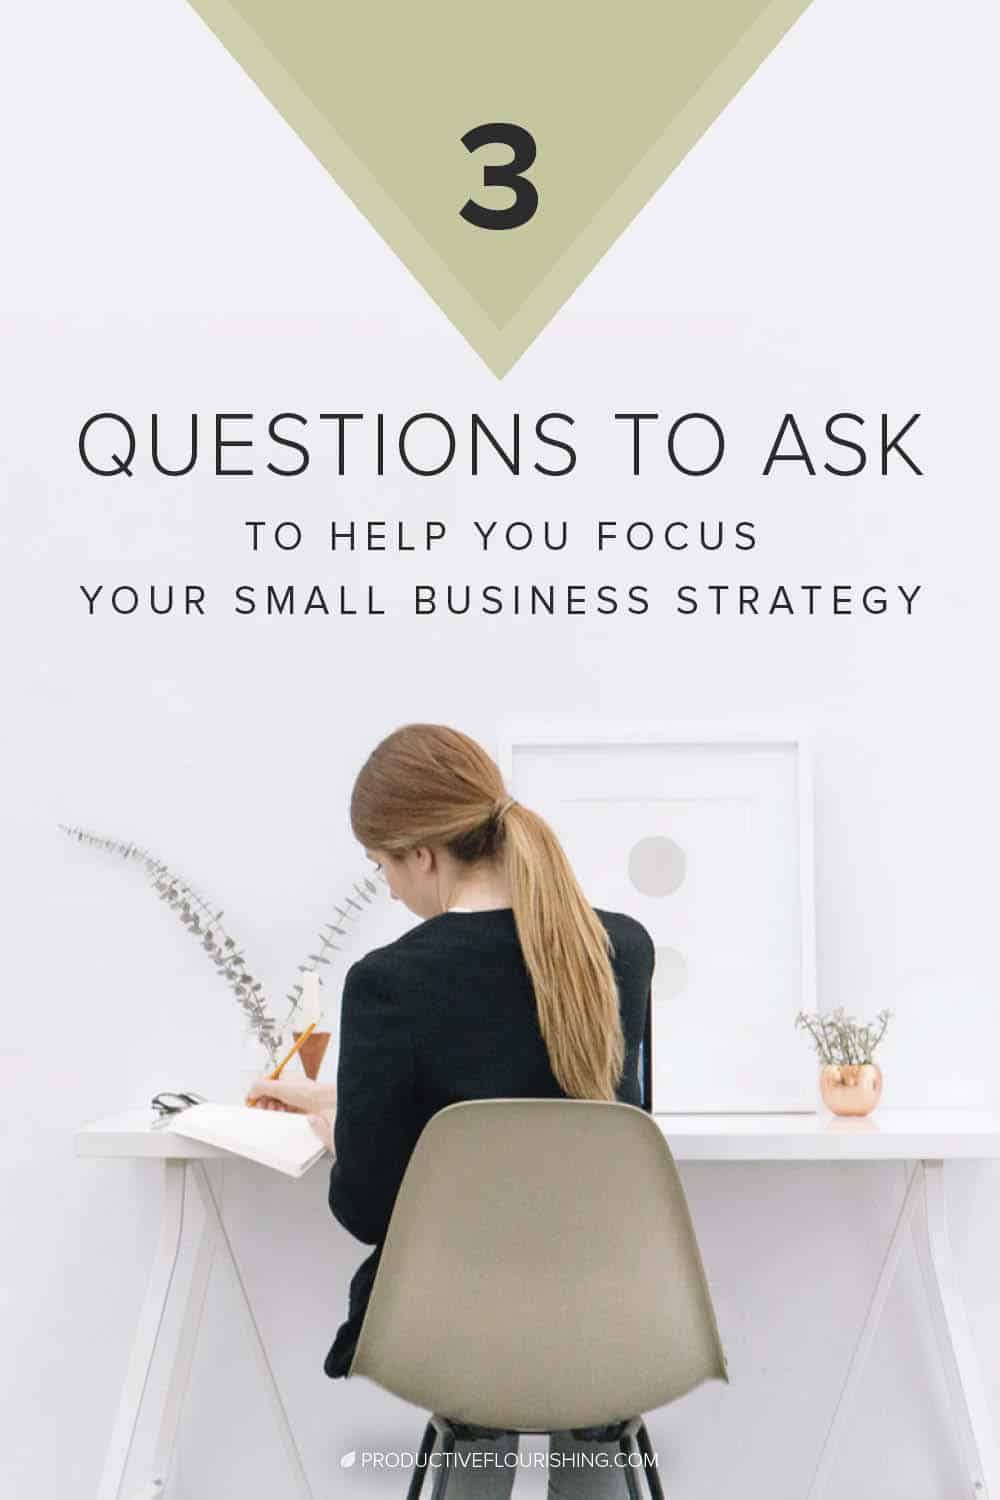 Allow yourself 30 minutes to review these questions to make sure your operations are in alignment with your strategy and vision. The minimal investment of time pays huge returns in clarity and concentration of resources. #productiveflourising #businessstrategy #productivity